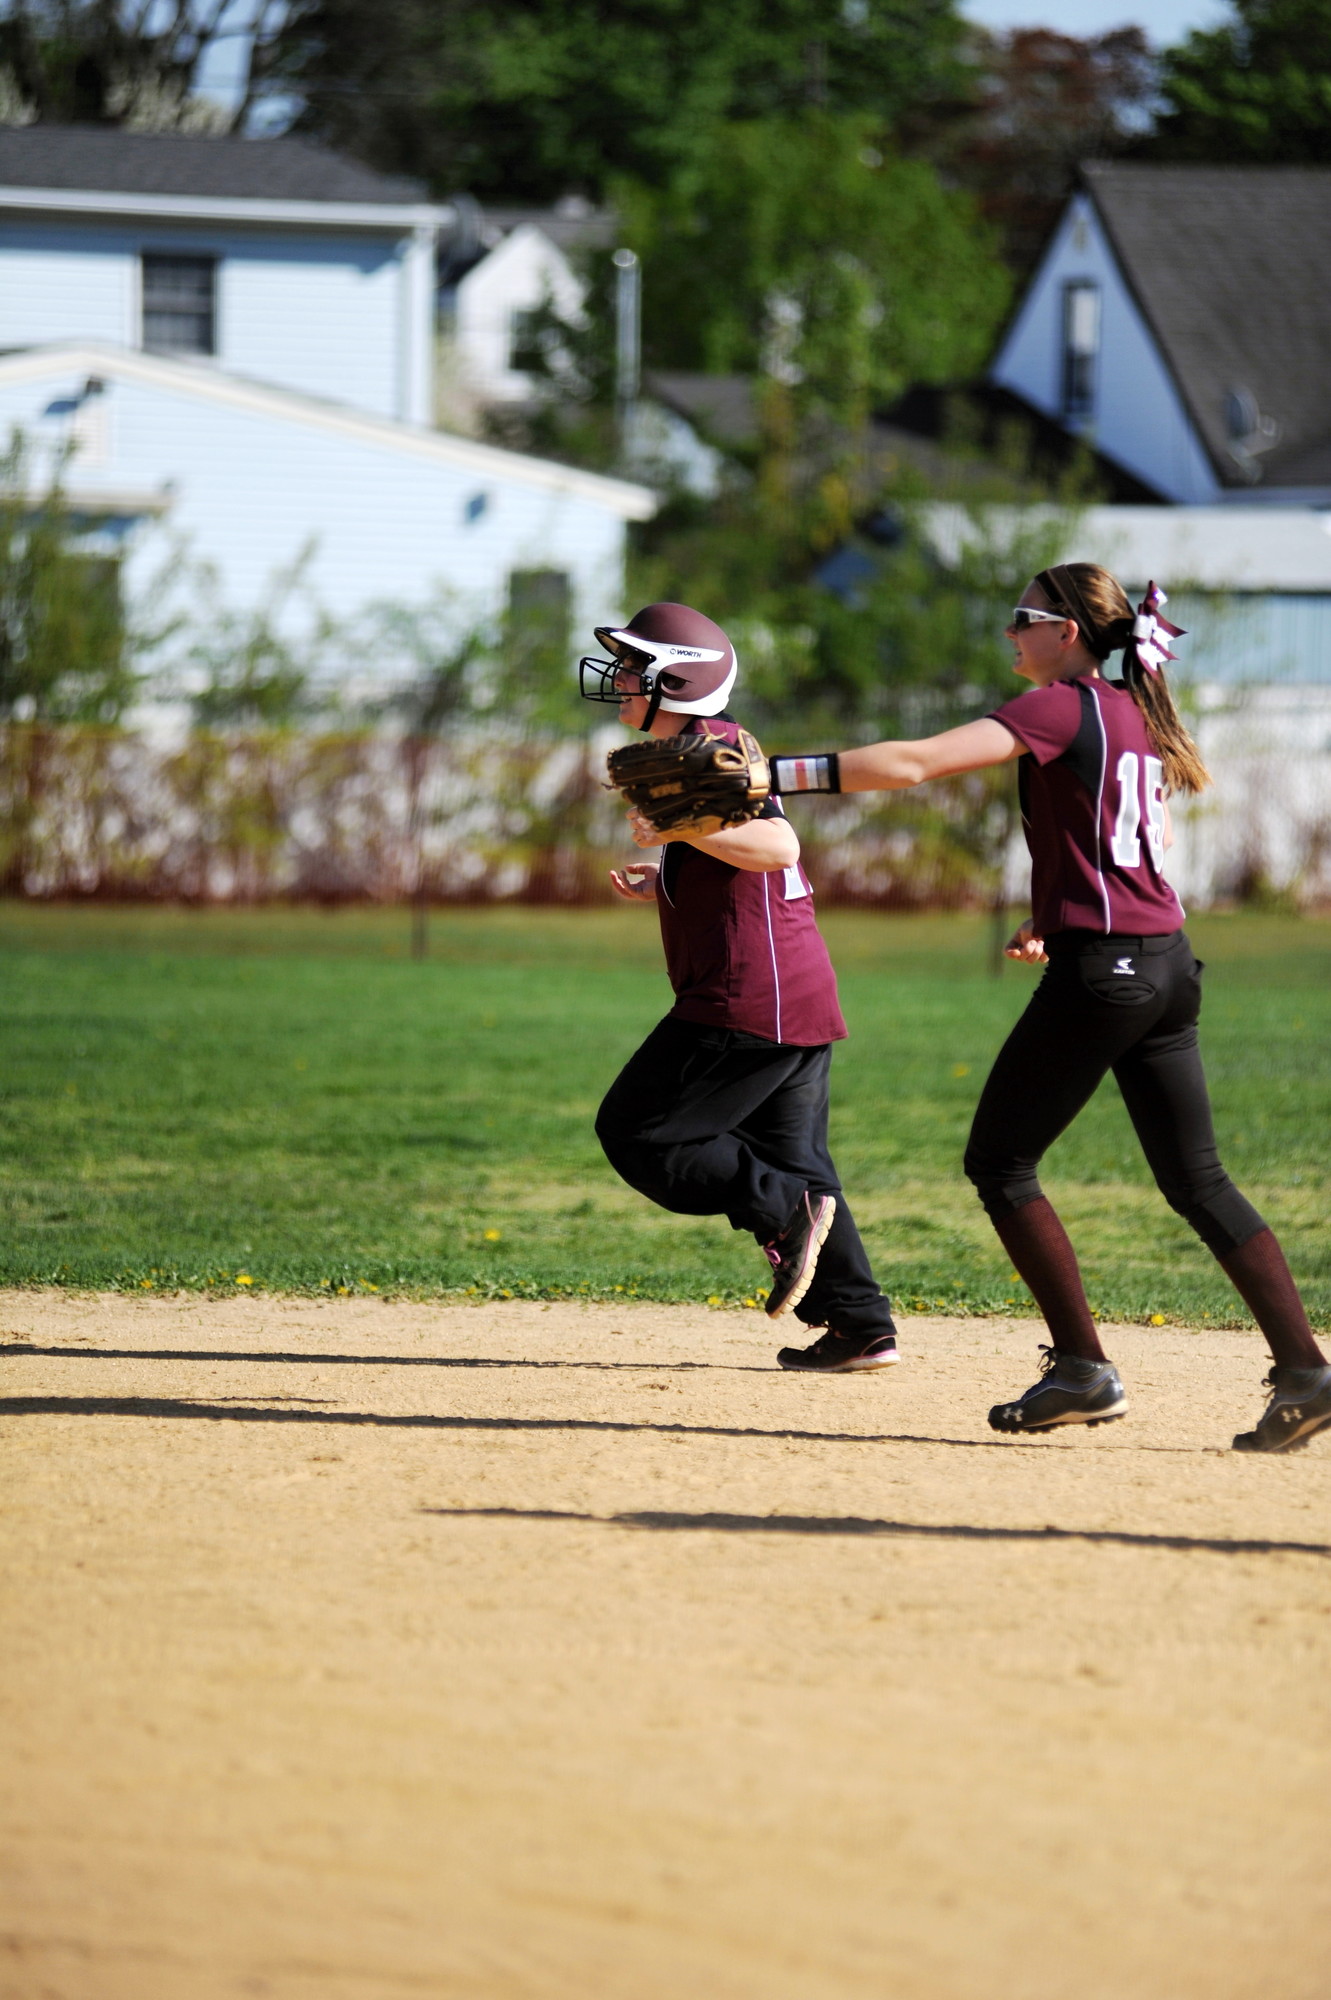 Teammate Kirstin Cox helped guide her as she rounded the bases.